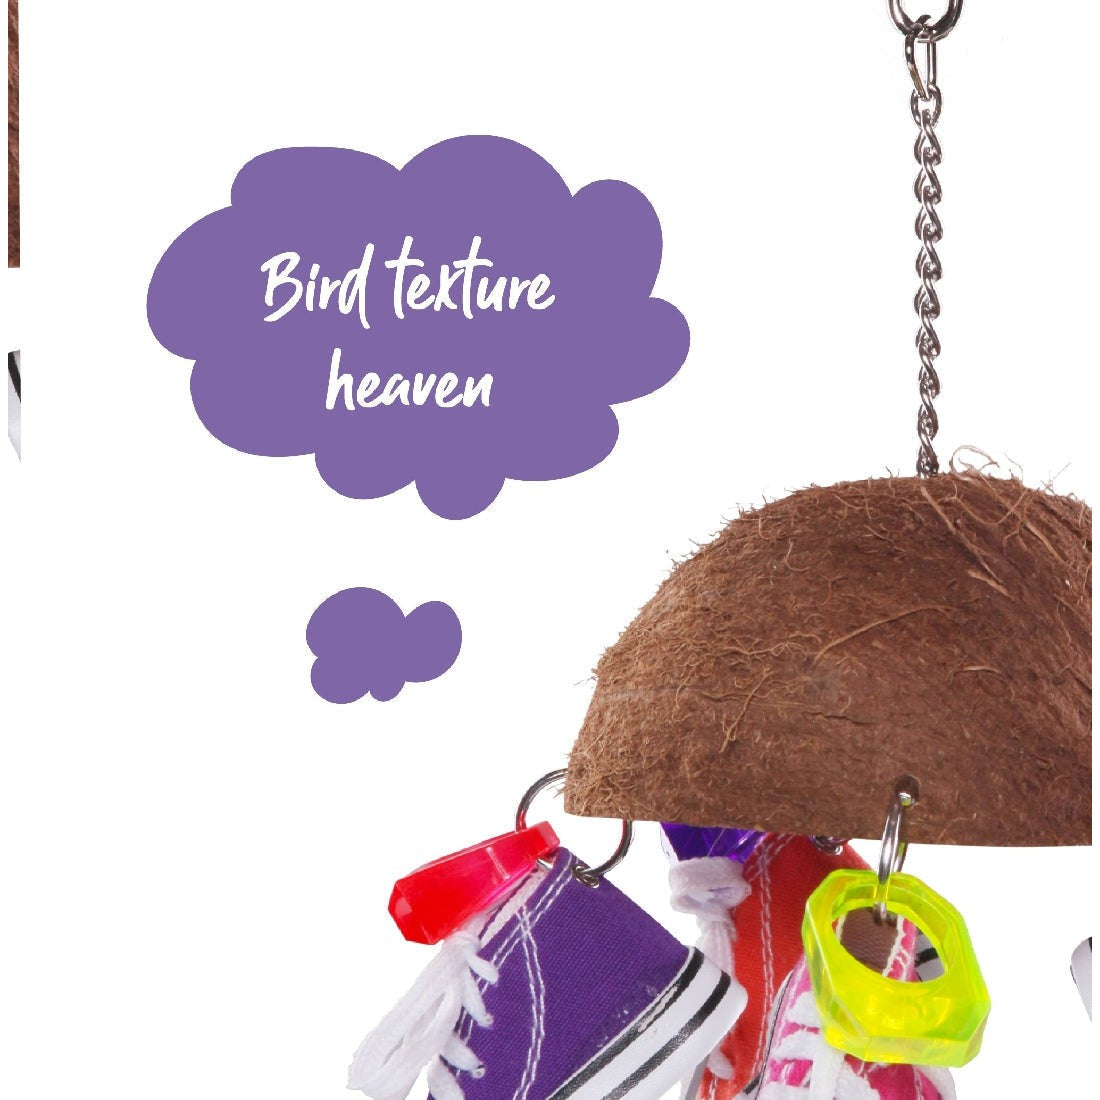 Colorful bird toy featuring a coconut shell, sneakers, and bells.